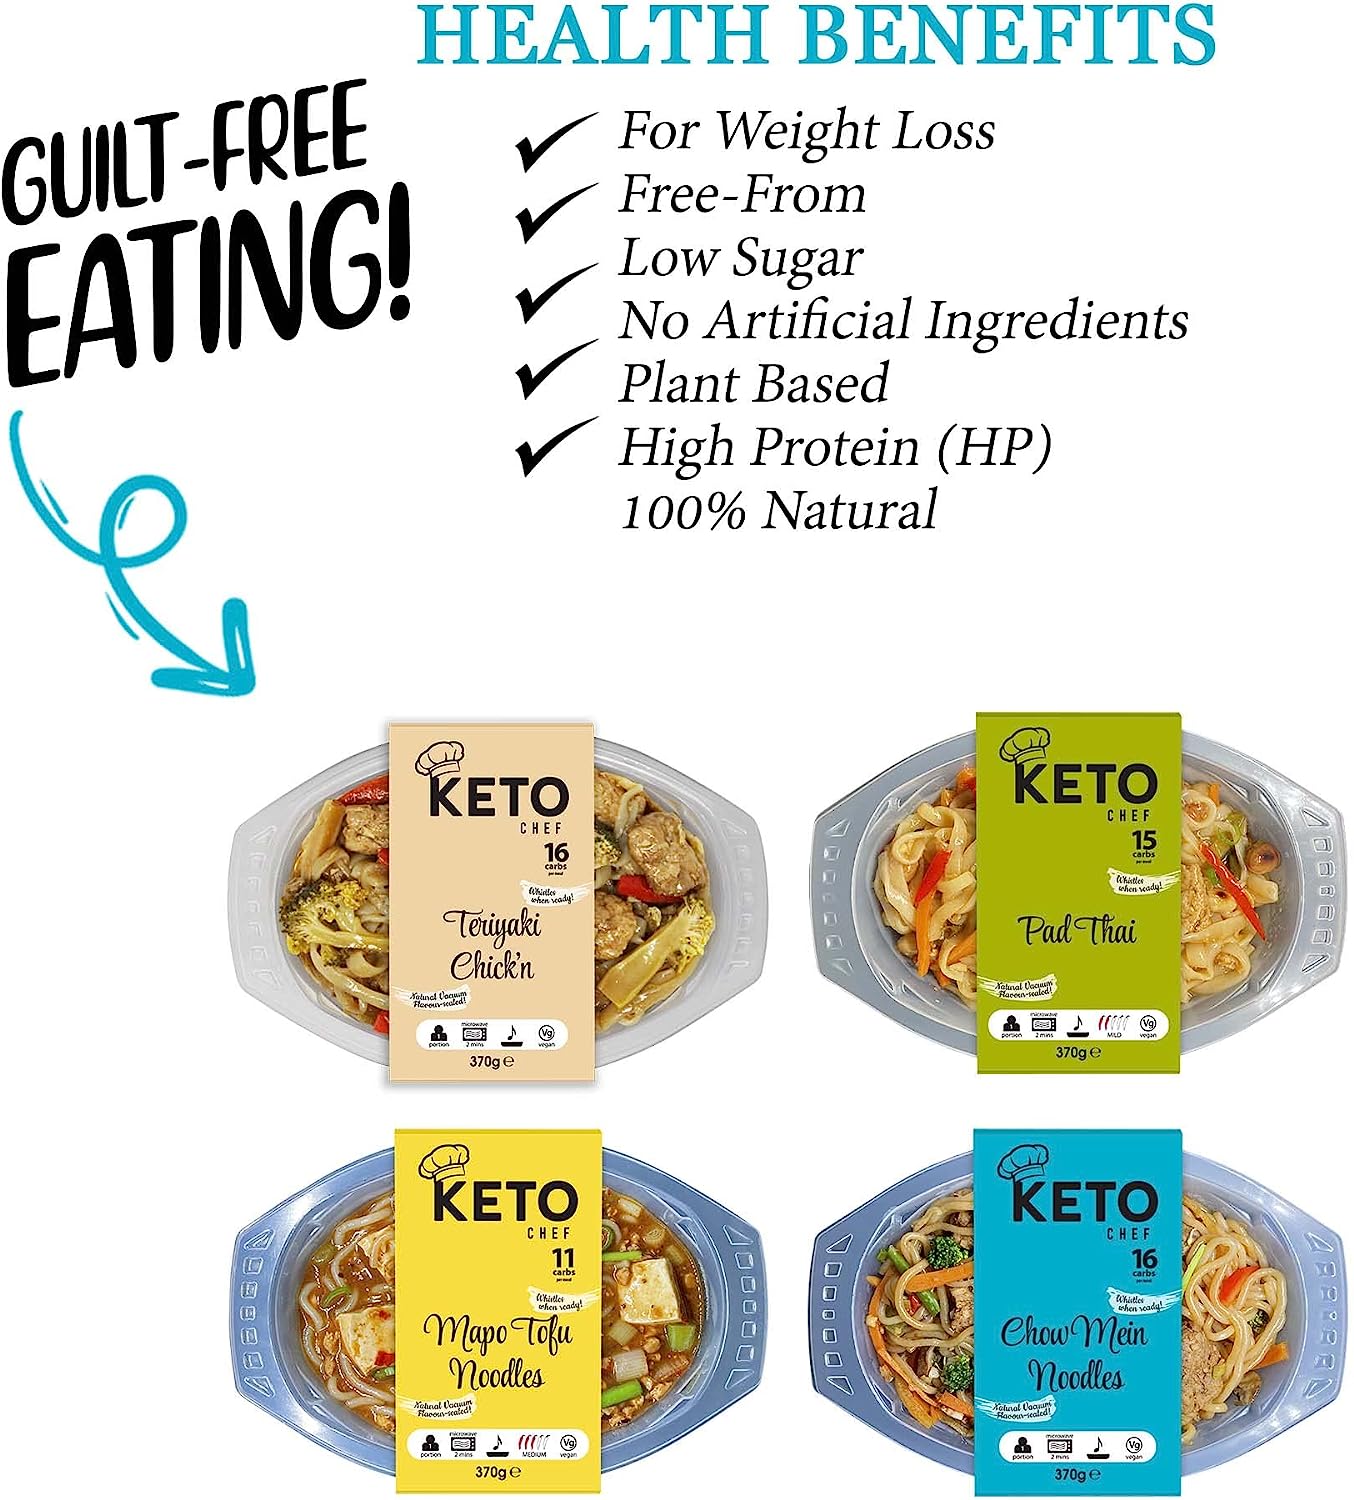 Keto Chef Variety Meal Pack - Review & Benefits